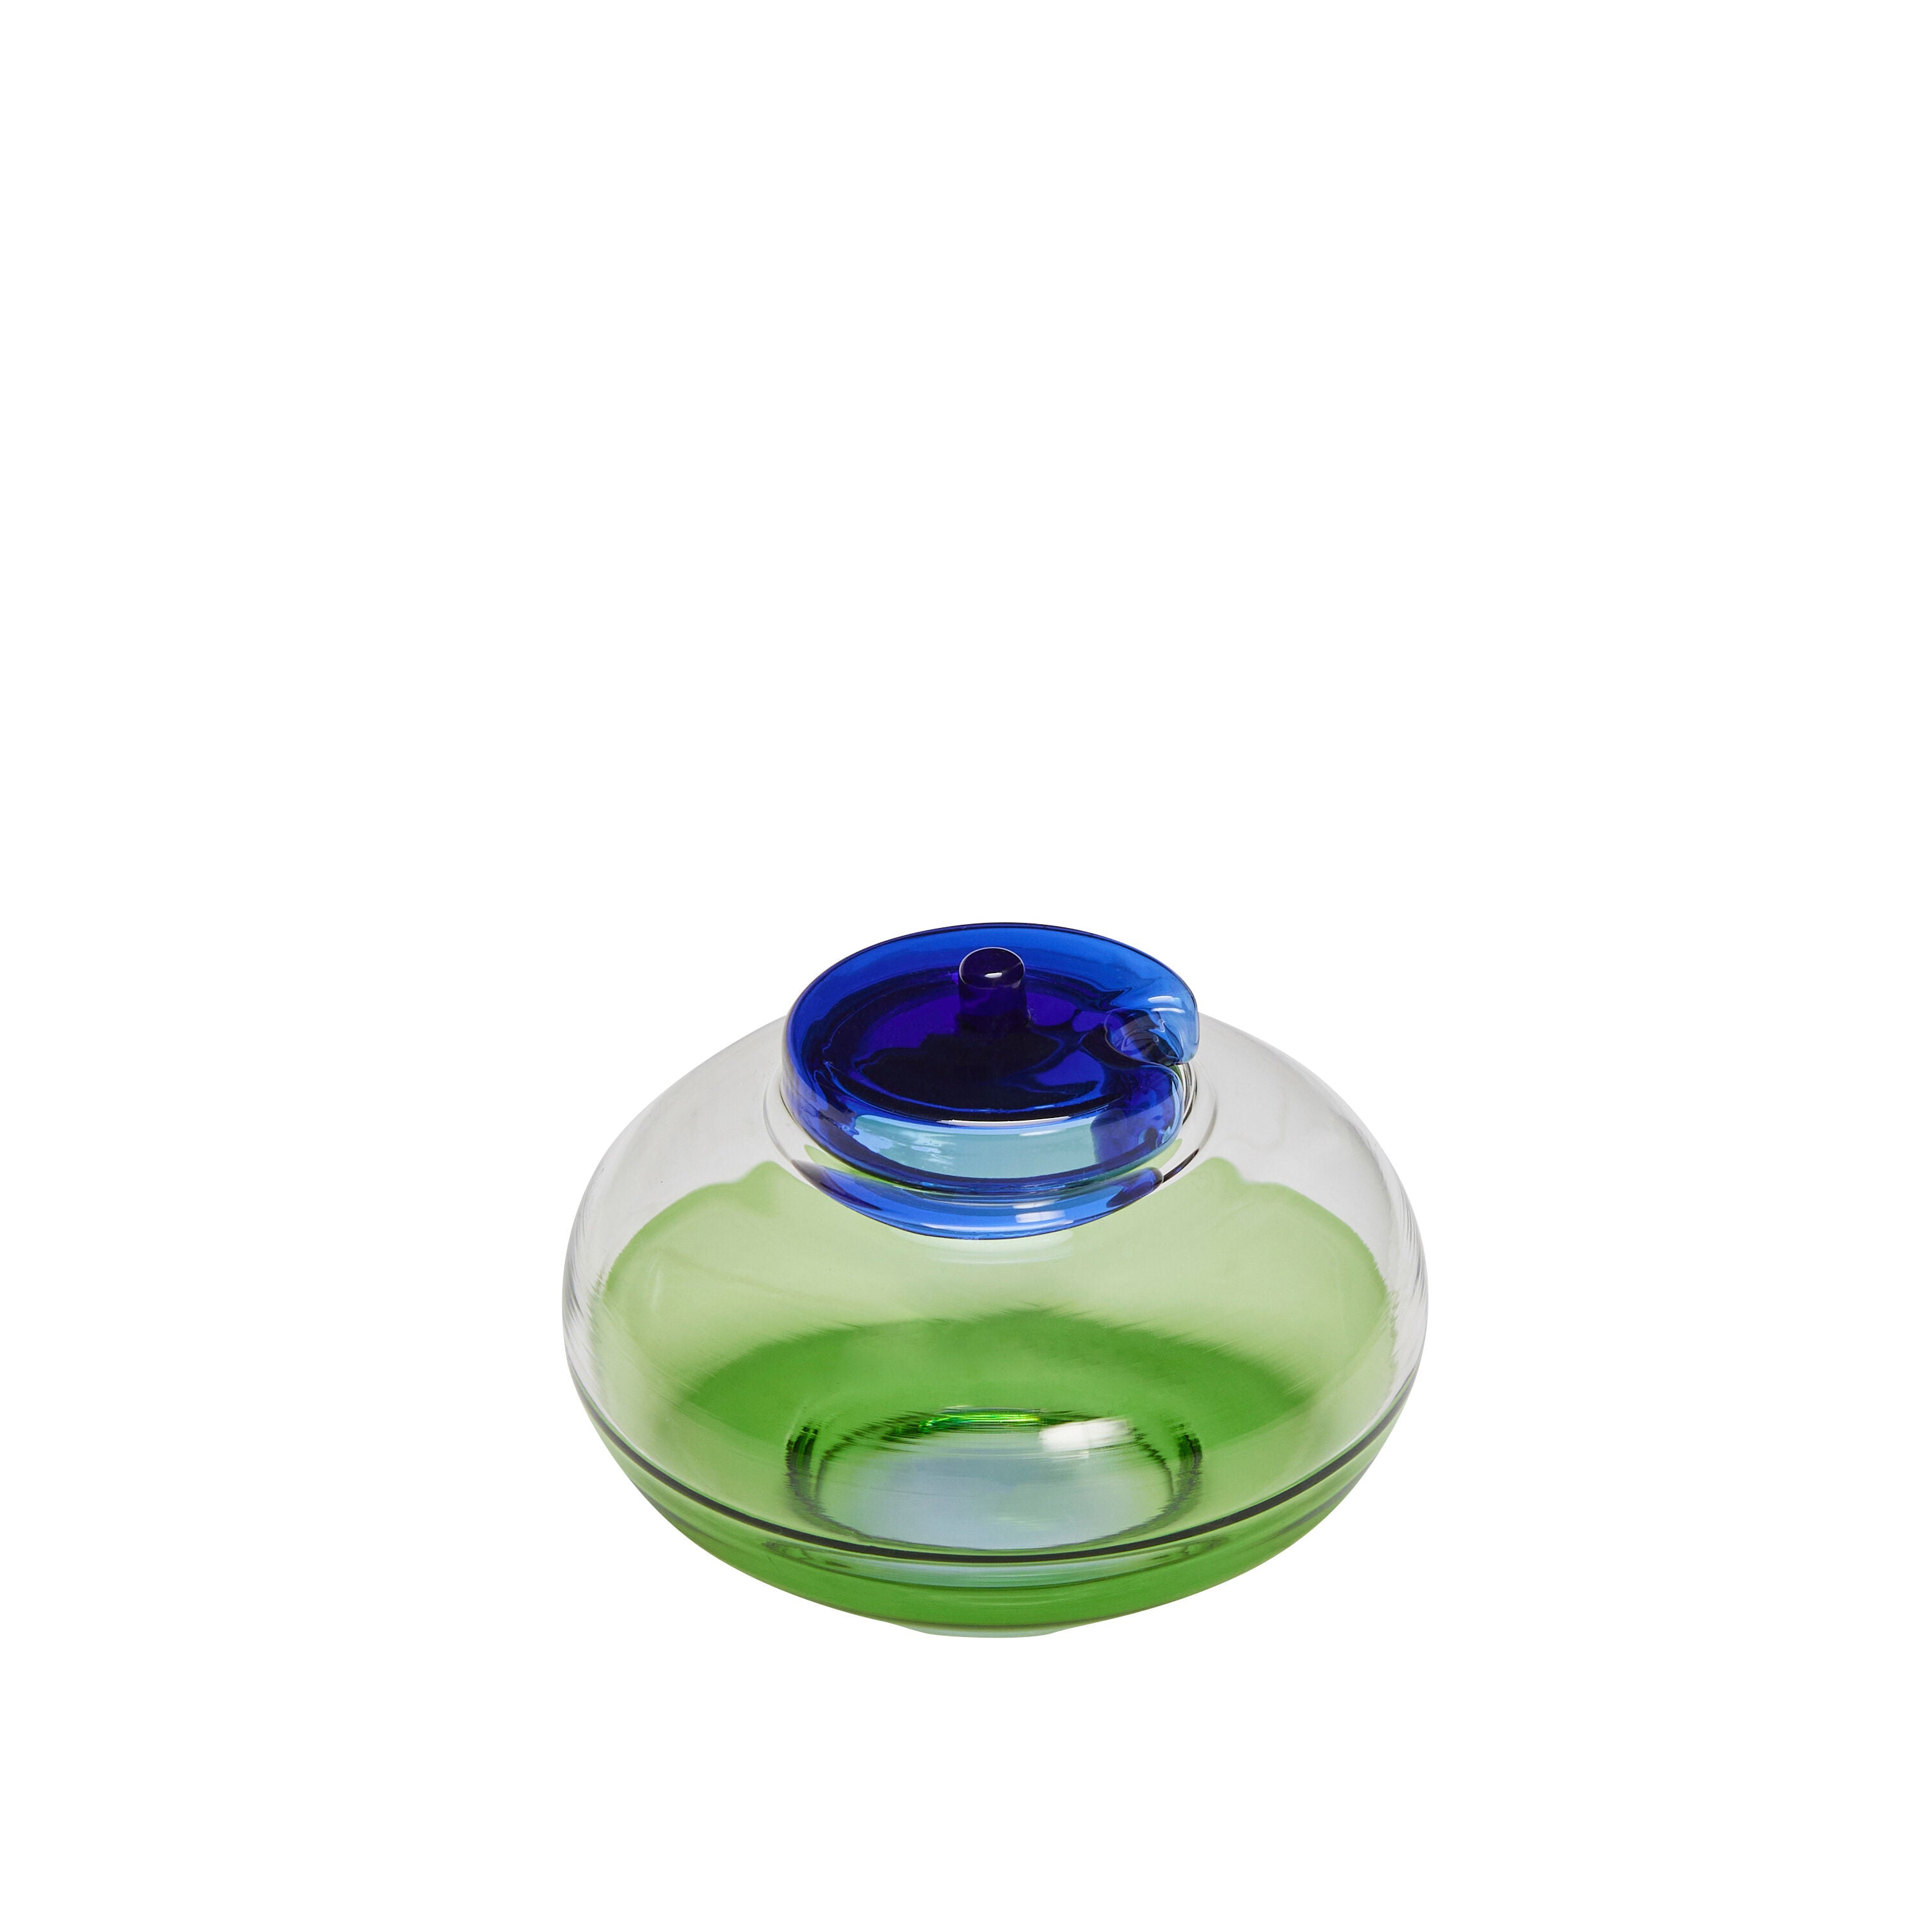 NoRush Sugar Bowl in Blue, Clear, and Green